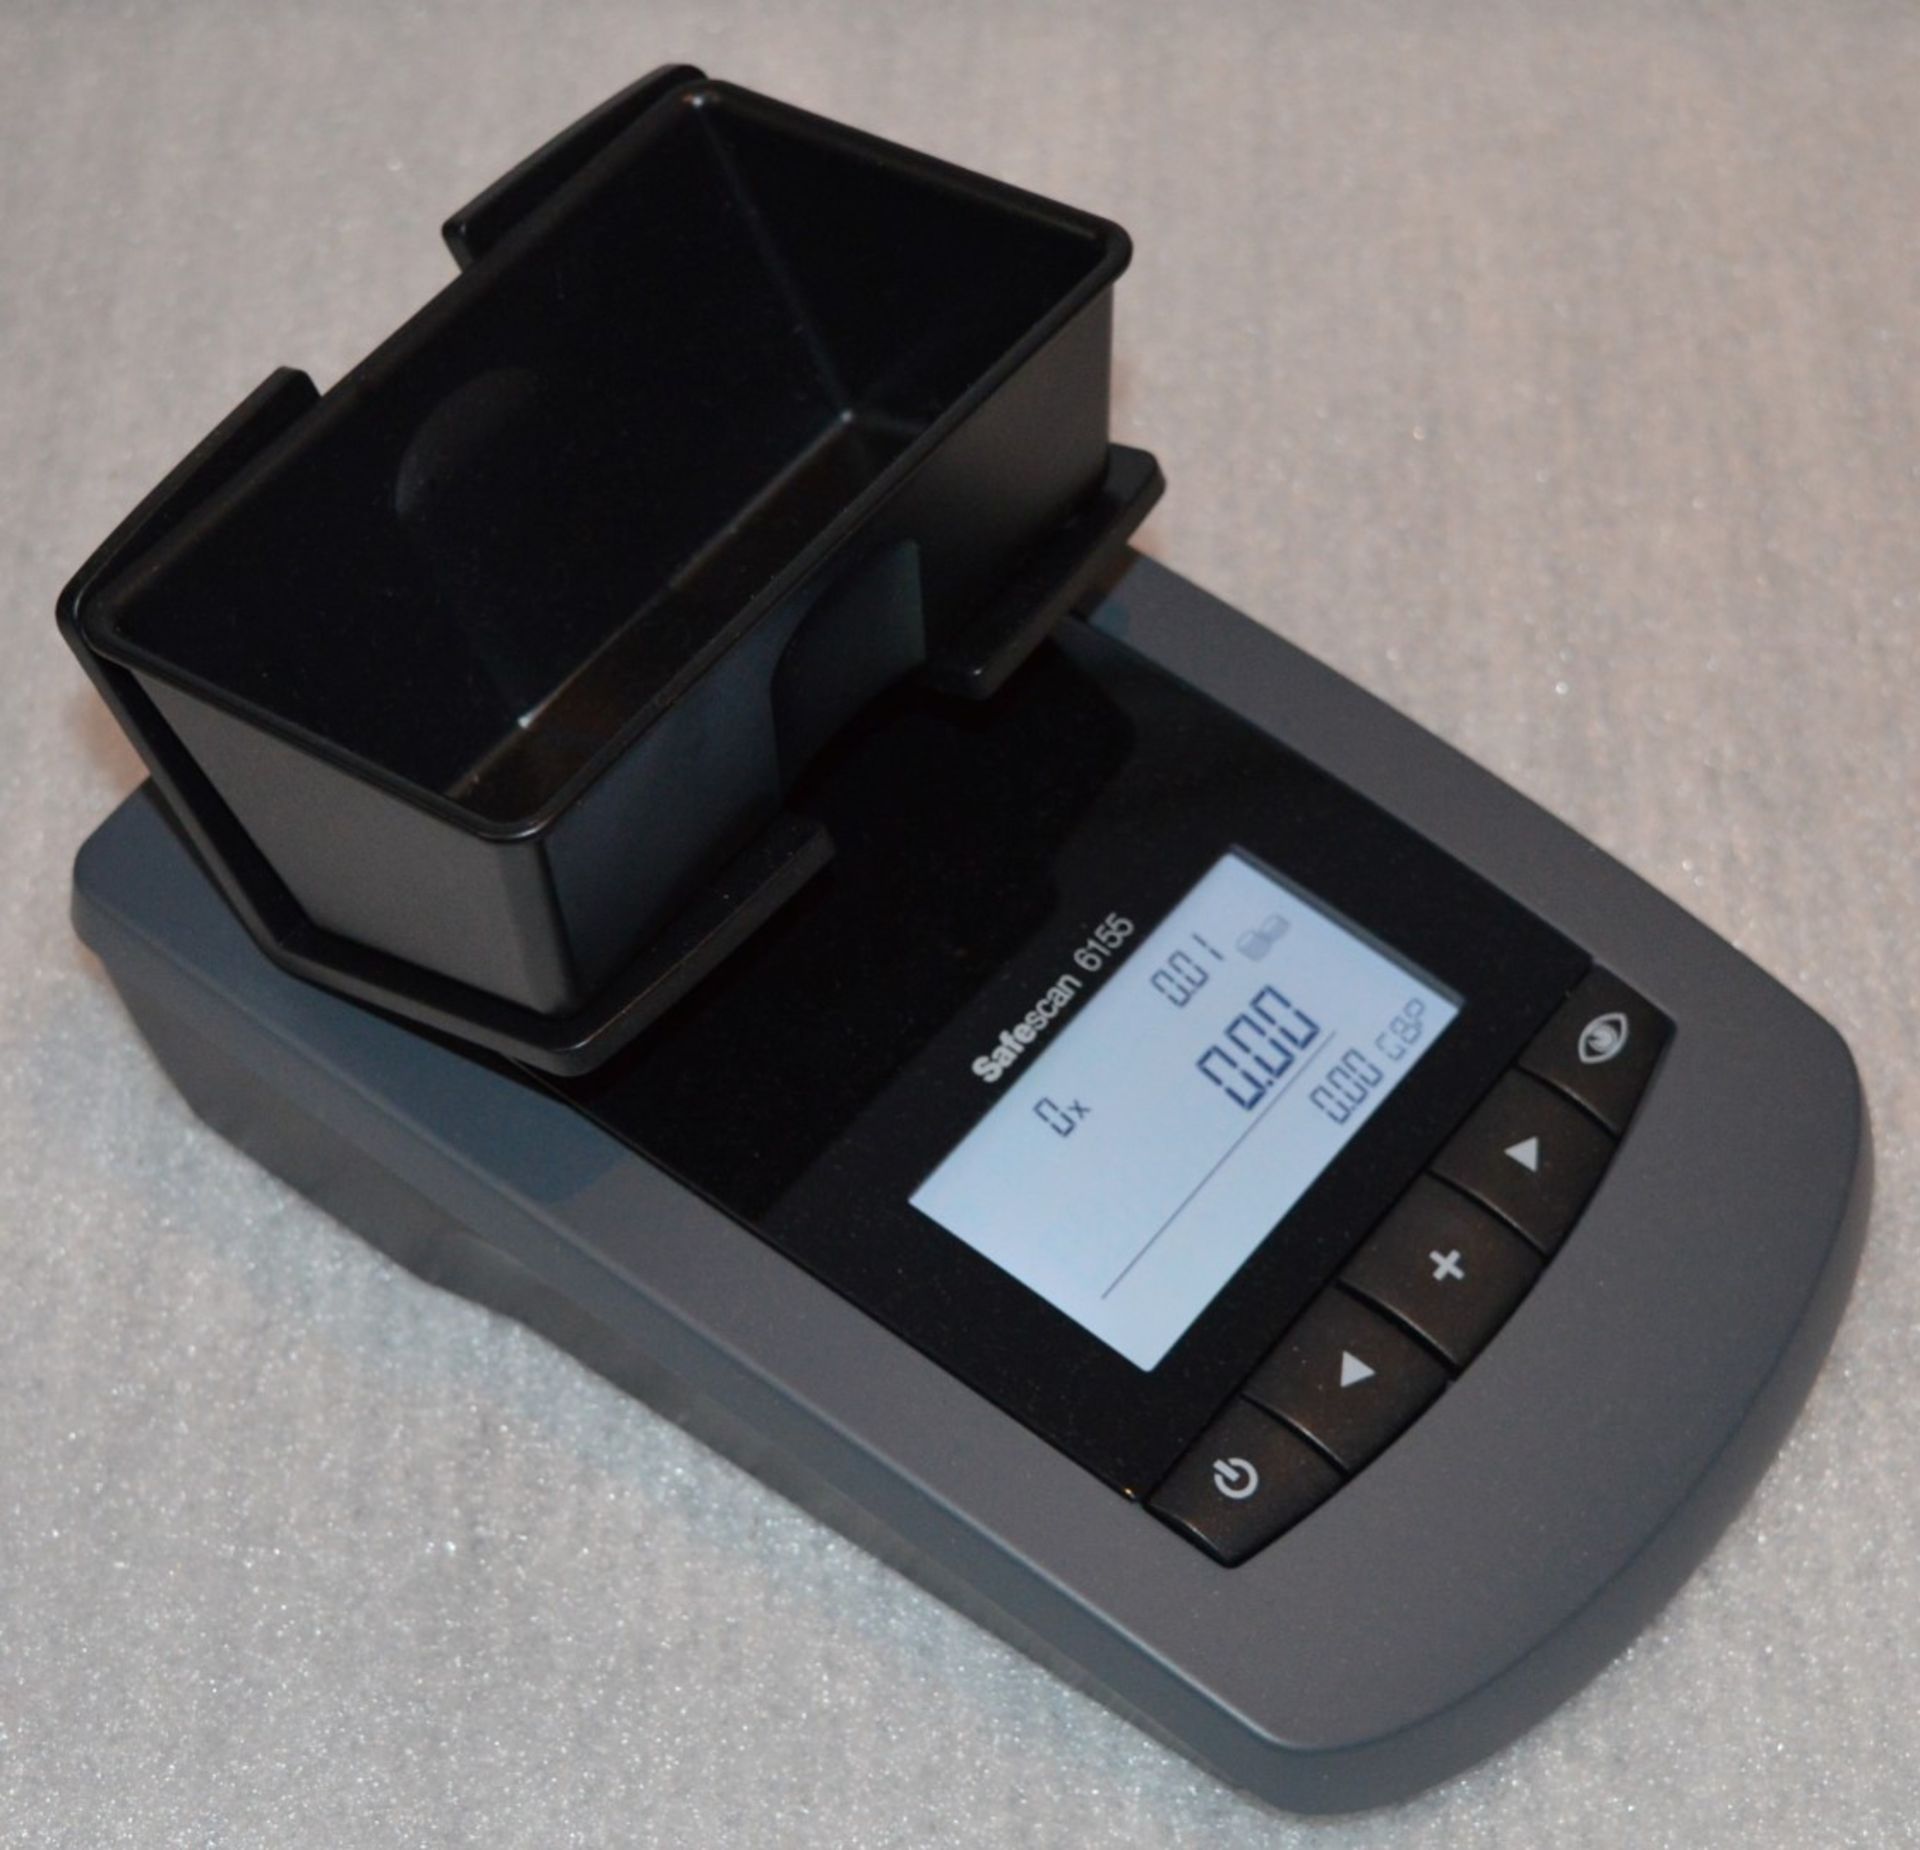 1 x SafeScan 6155 Coin and Bank Note Counter - Includes Coin and Note Trays, Box, Instructions and - Image 3 of 10